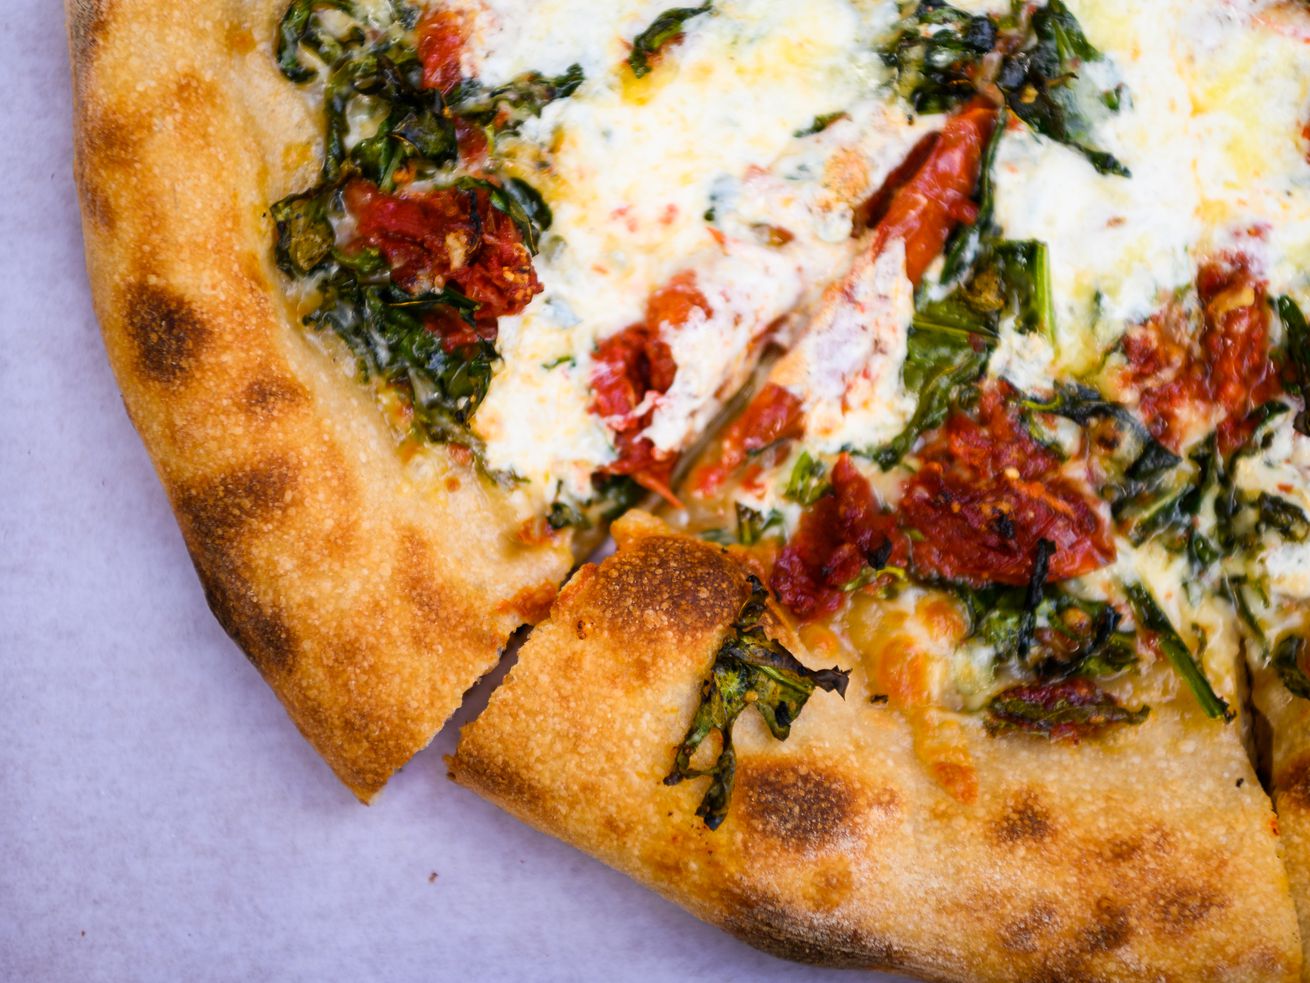 A pizza covered in kale and sundried tomatoes at Lovely’s Fifty Fifty